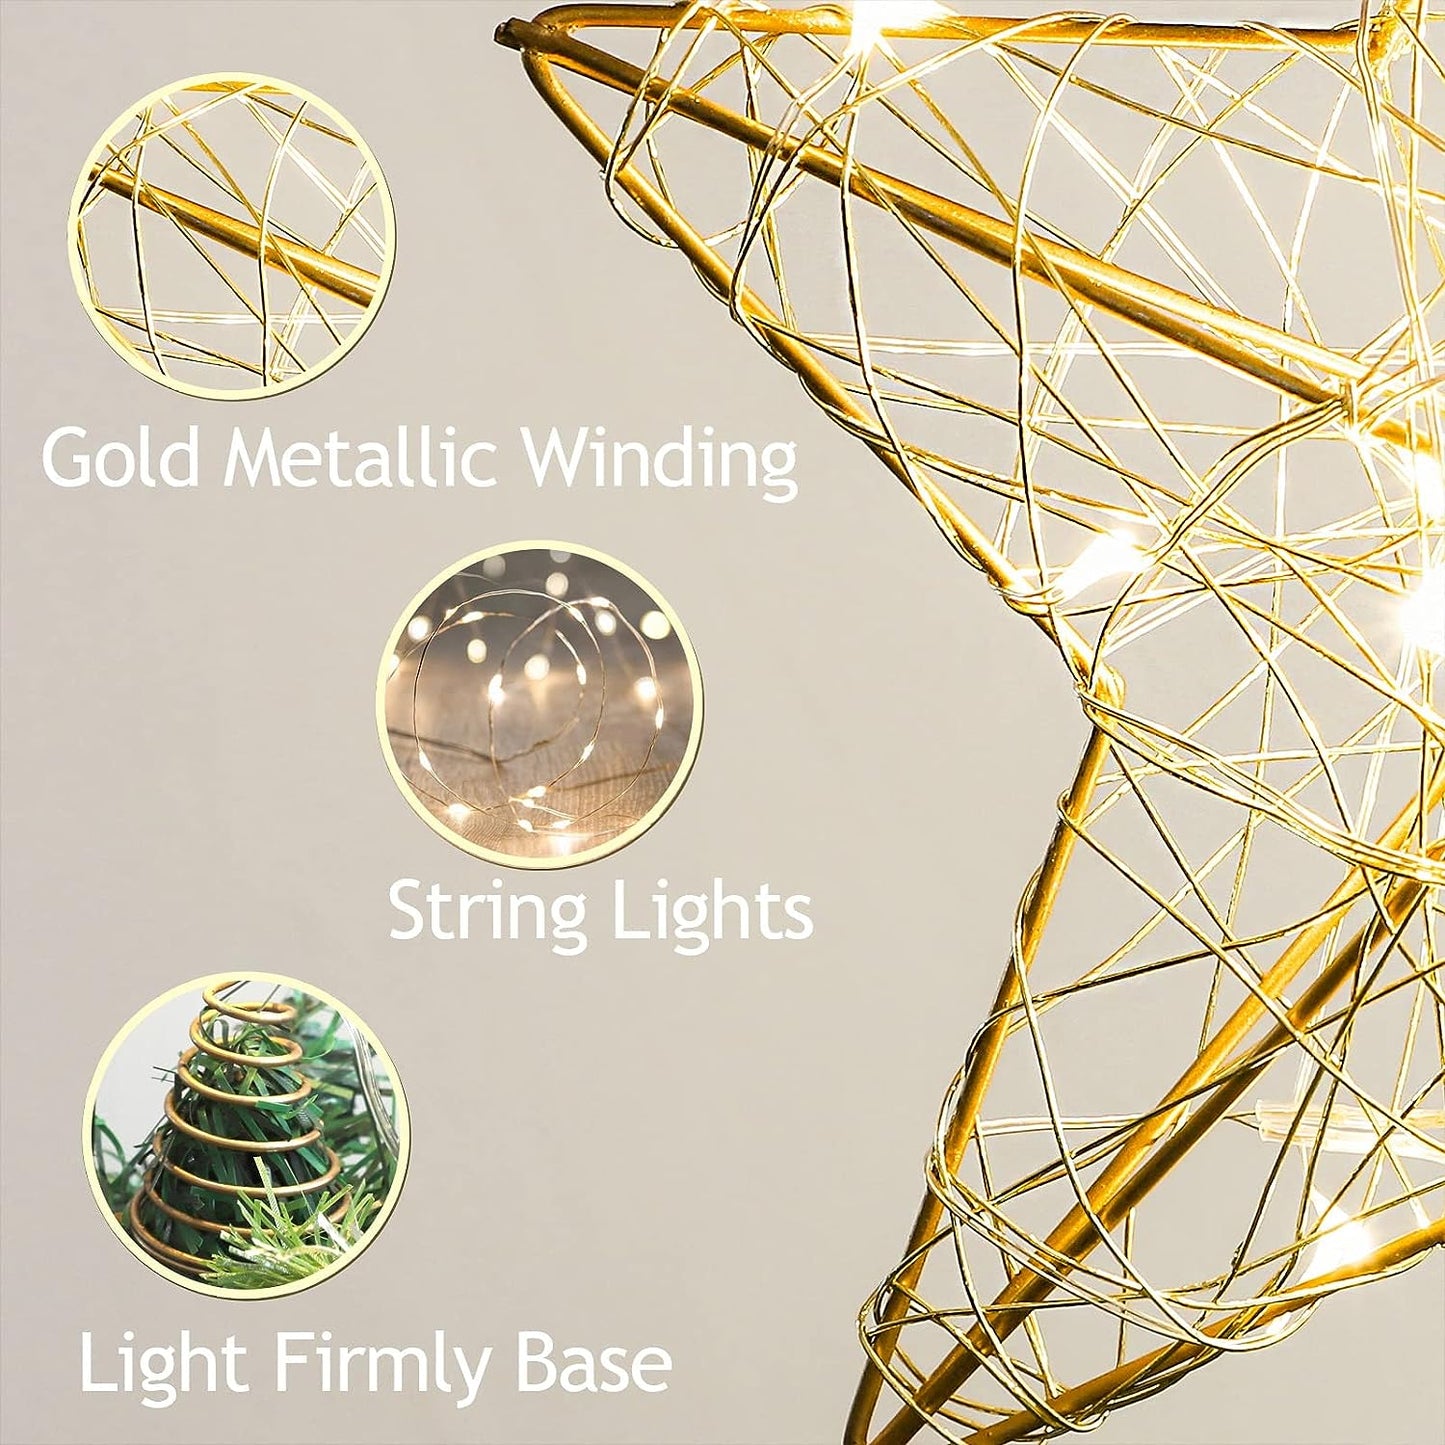 Christmas Star Tree Topper LED Lighted Hollow